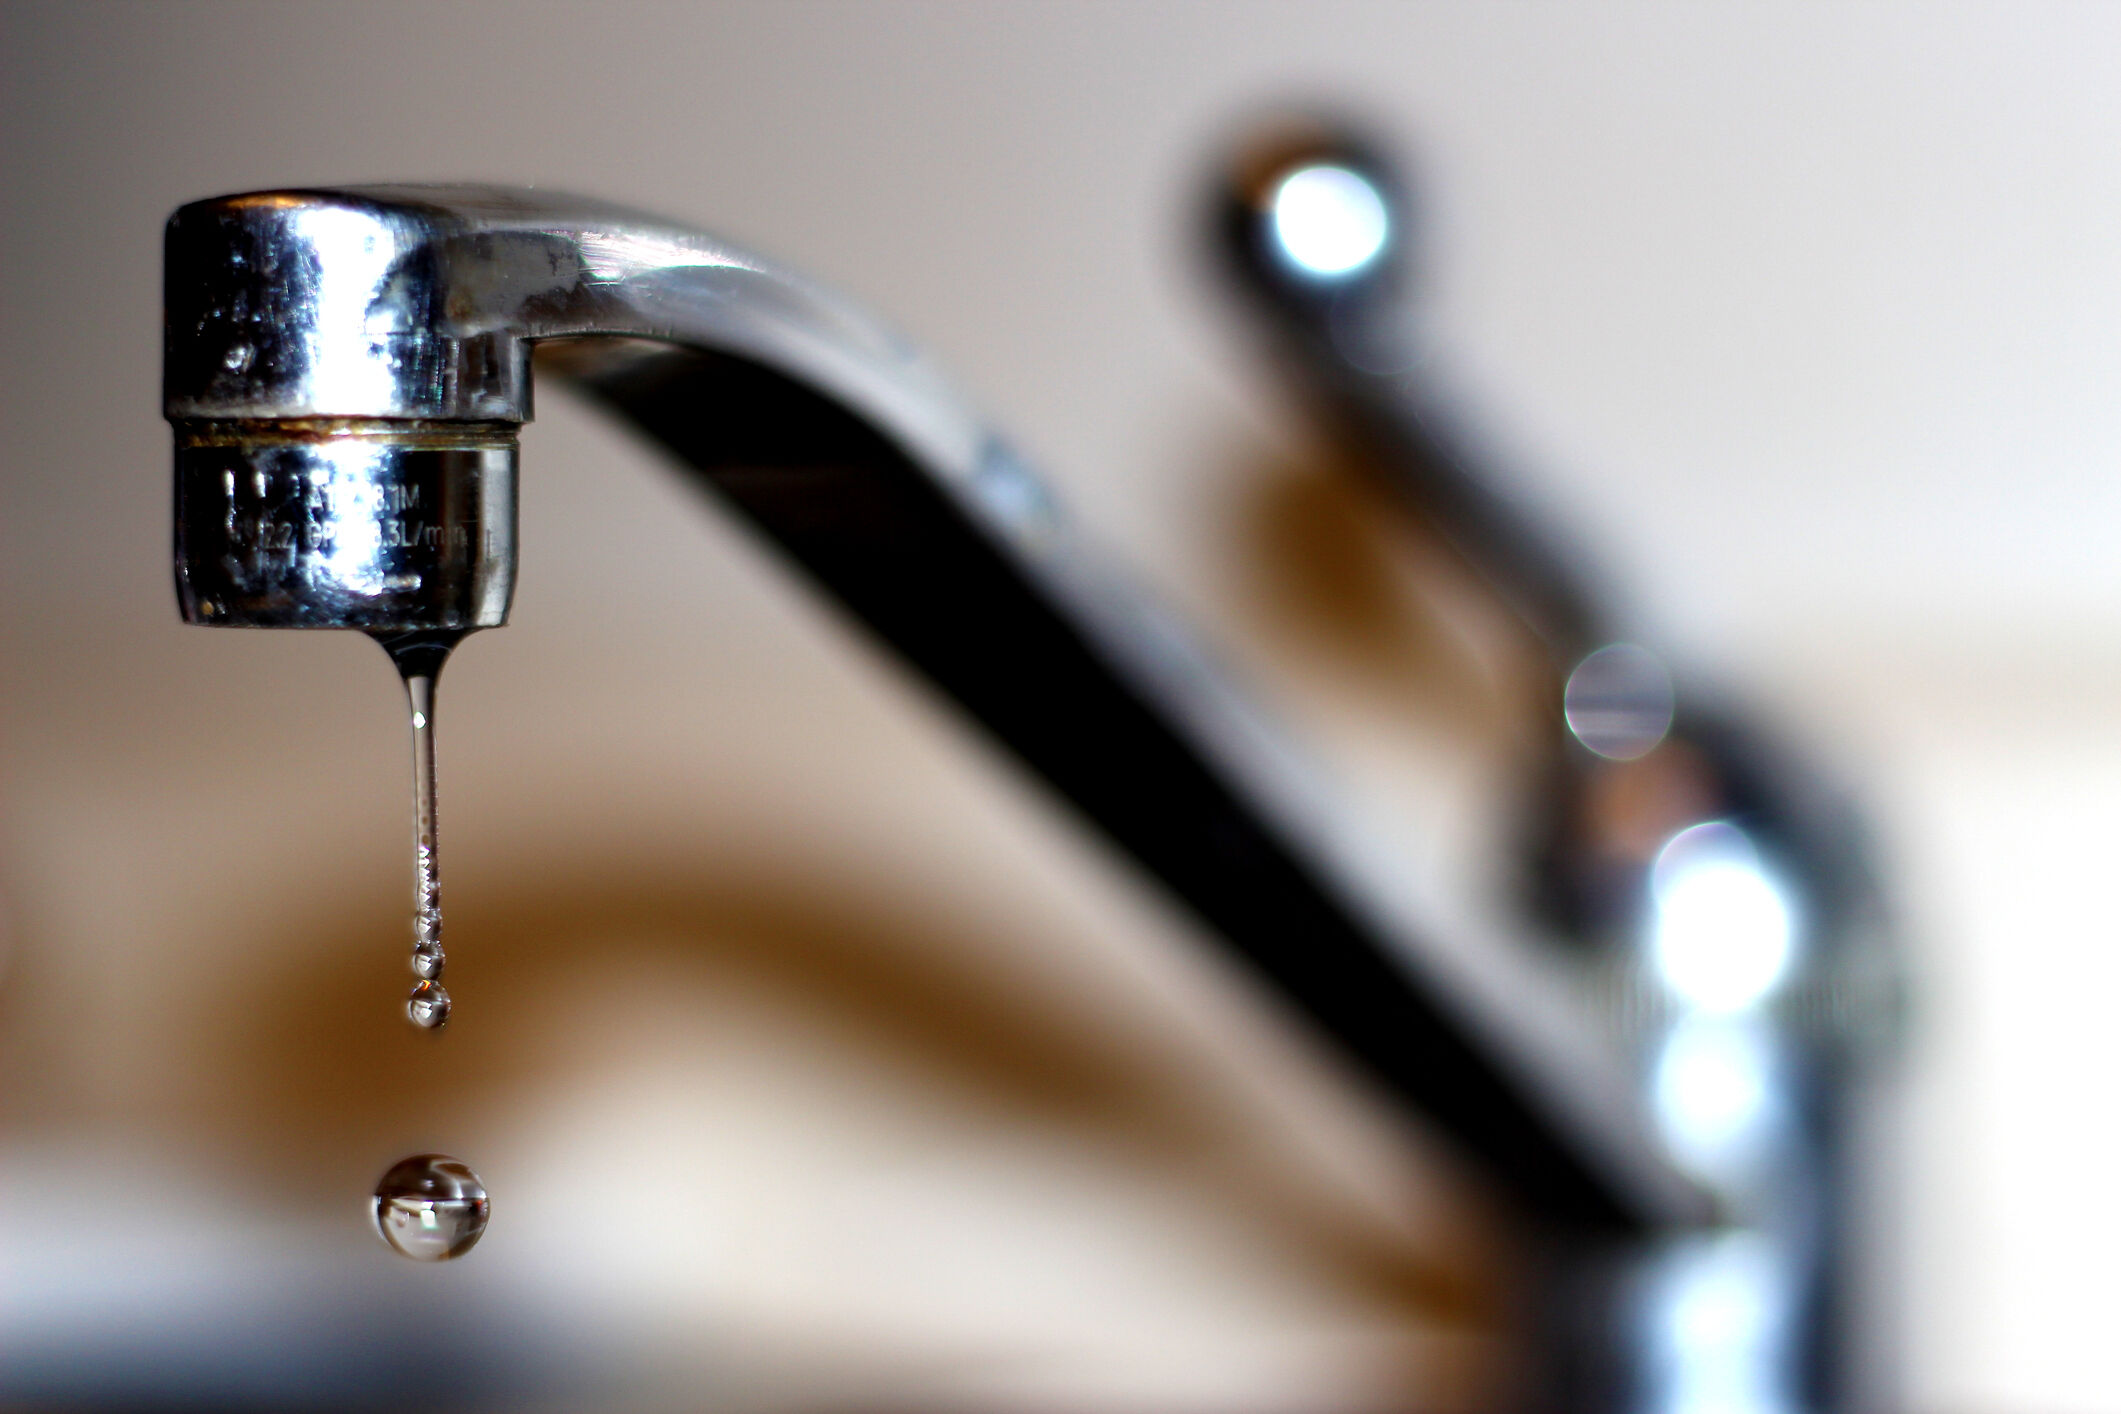 DC Water to begin disconnecting service to customers with pastdue